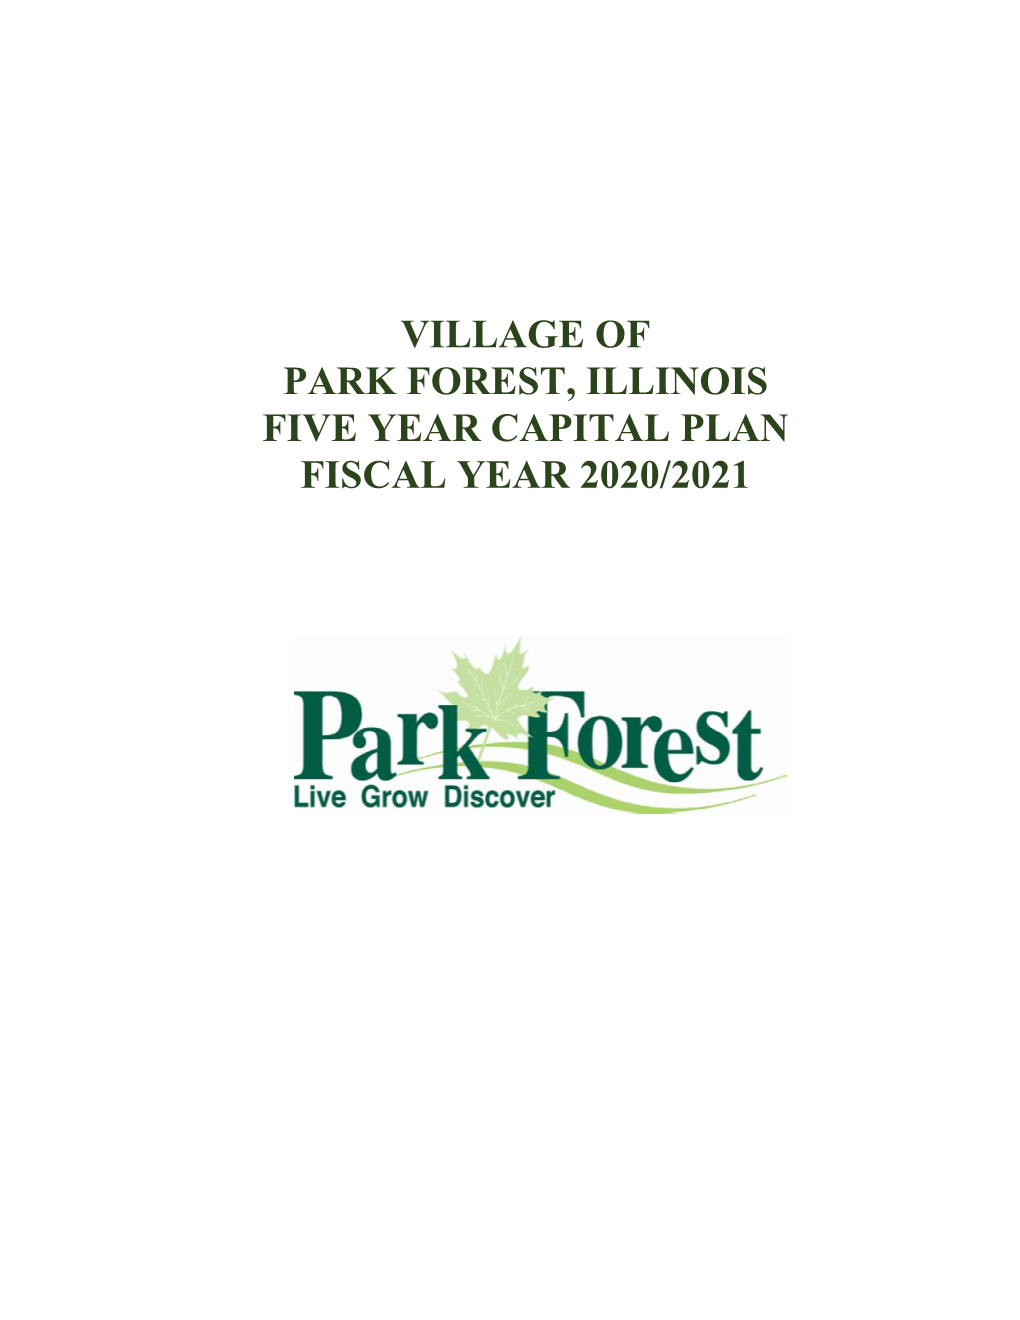 Village of Park Forest, Illinois Five Year Capital Plan Fiscal Year 2020/2021